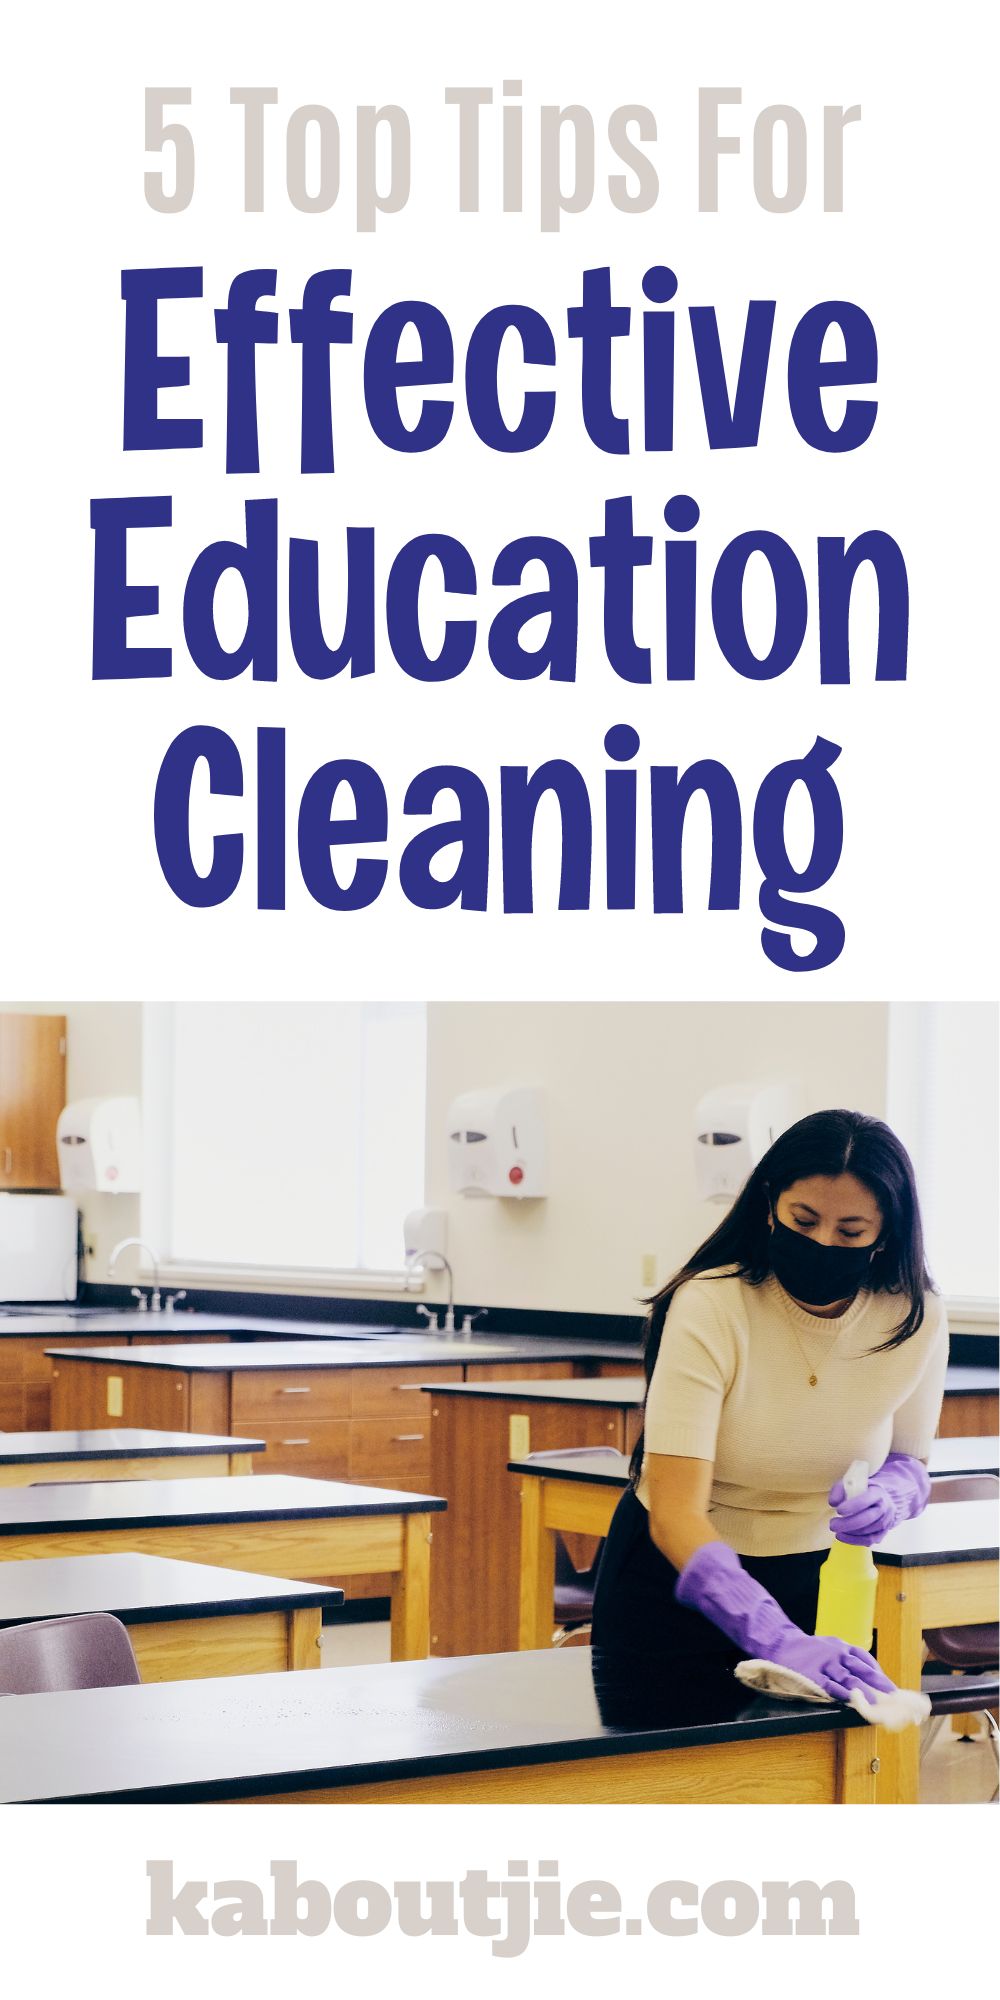 Effective Education Cleaning - 5 Top Tips